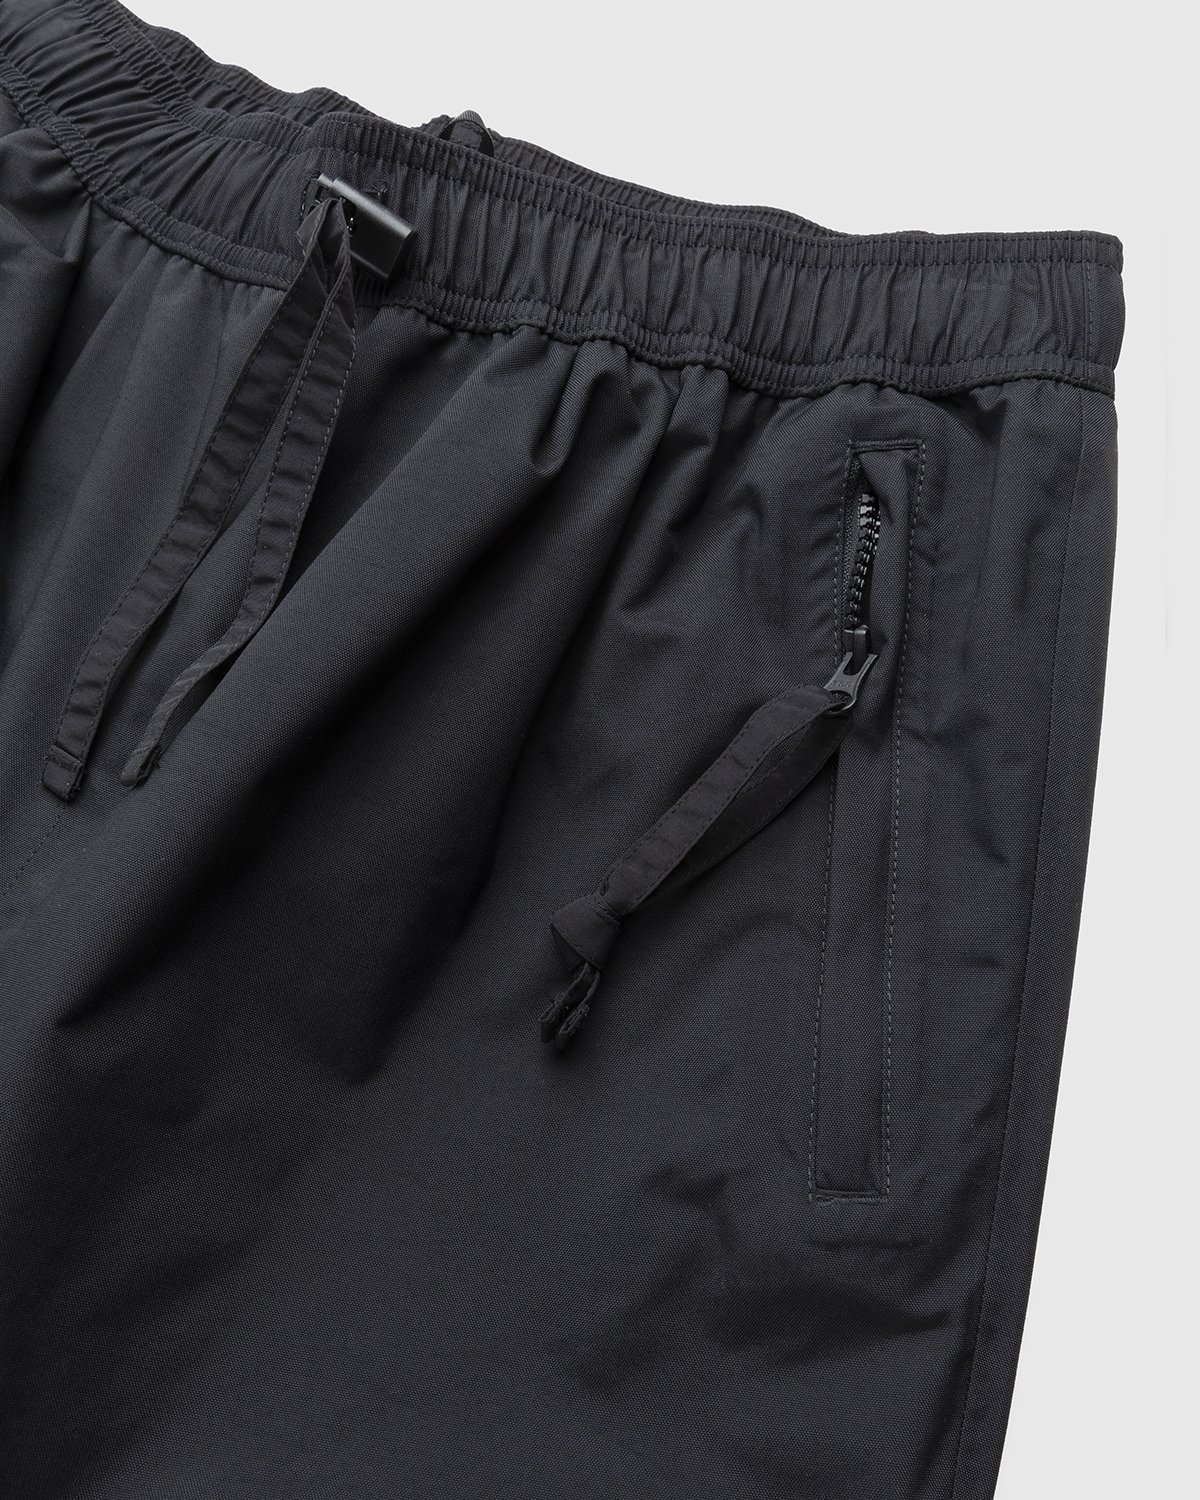 The North Face - Trans Antarctica Expedition Pant Black - Clothing - Black - Image 8